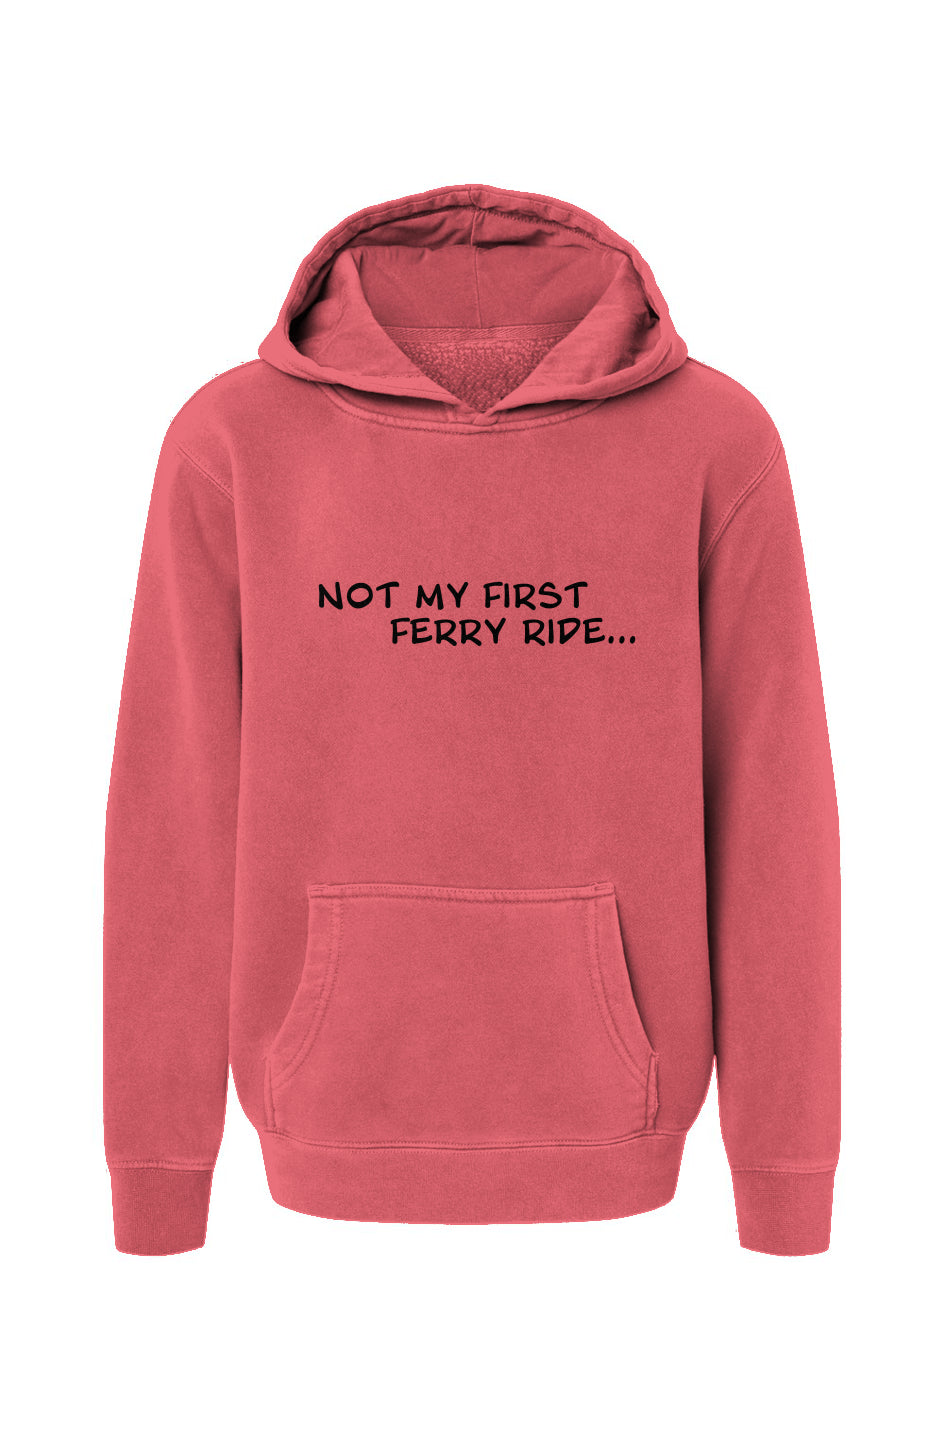 Not My First Ferry Ride Youth Hoodie